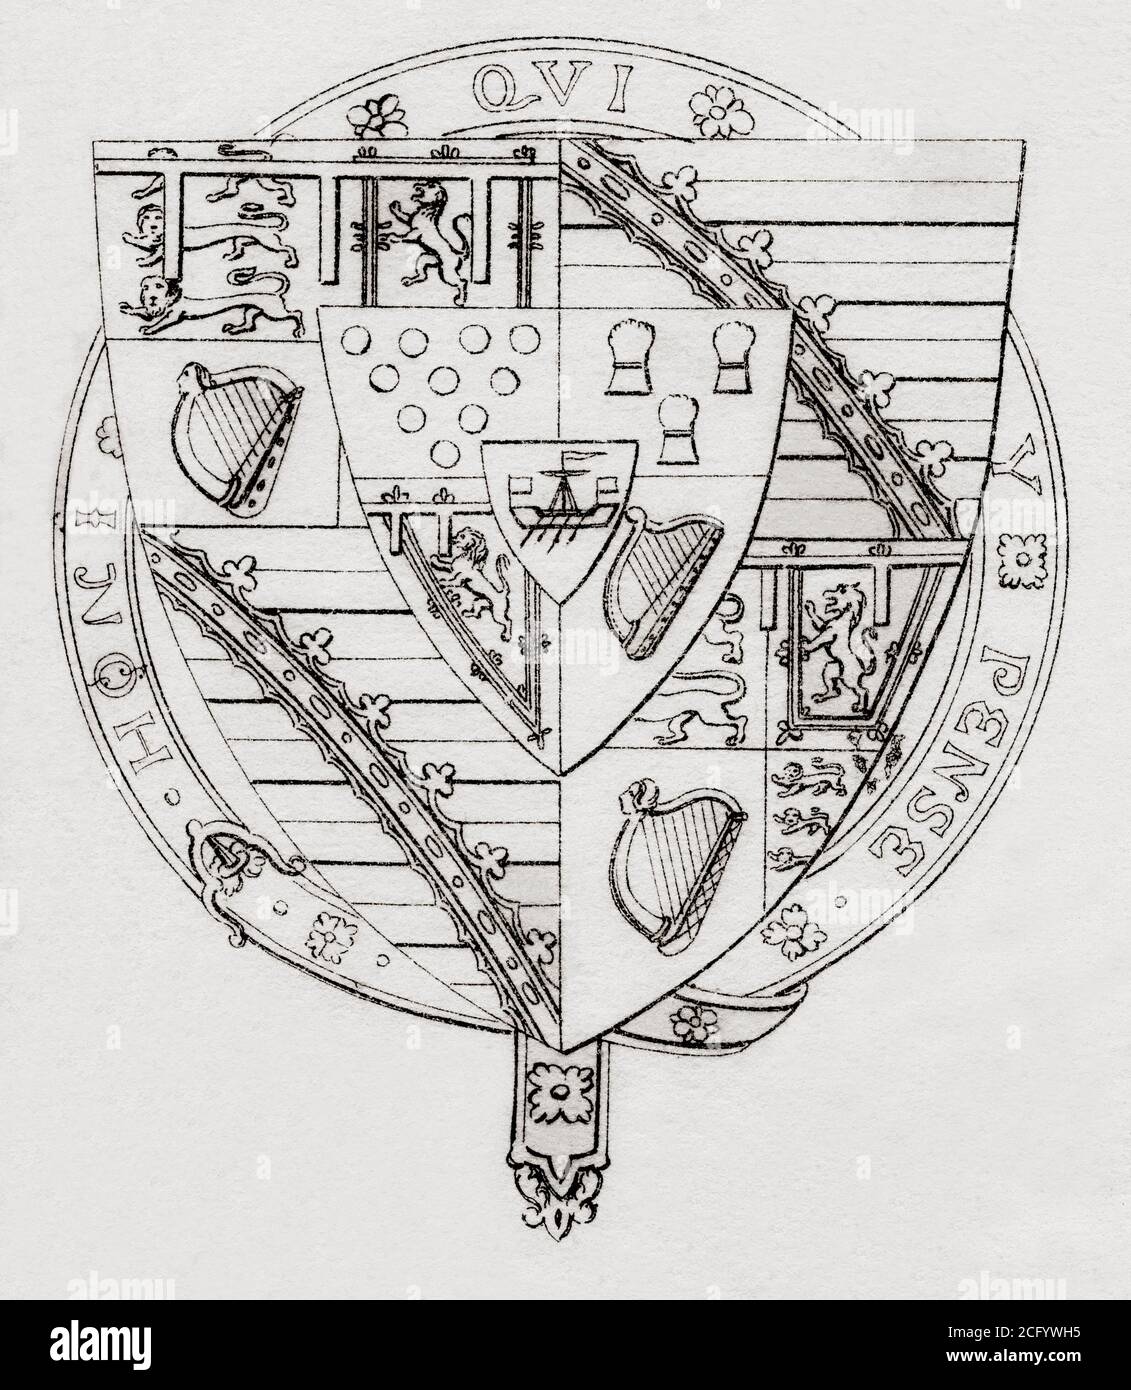 Arms of the Prince of Wales, Marshalled.  Impalement or marshalling is a combination of two coats of arms side by side in one divided heraldic shield to denote a union, most often that of a husband and wife, in this case the Prince and Princess of Wales.  From The National Encyclopaedia: A Dictionary of Universal Knowledge, published c.1890 Stock Photo